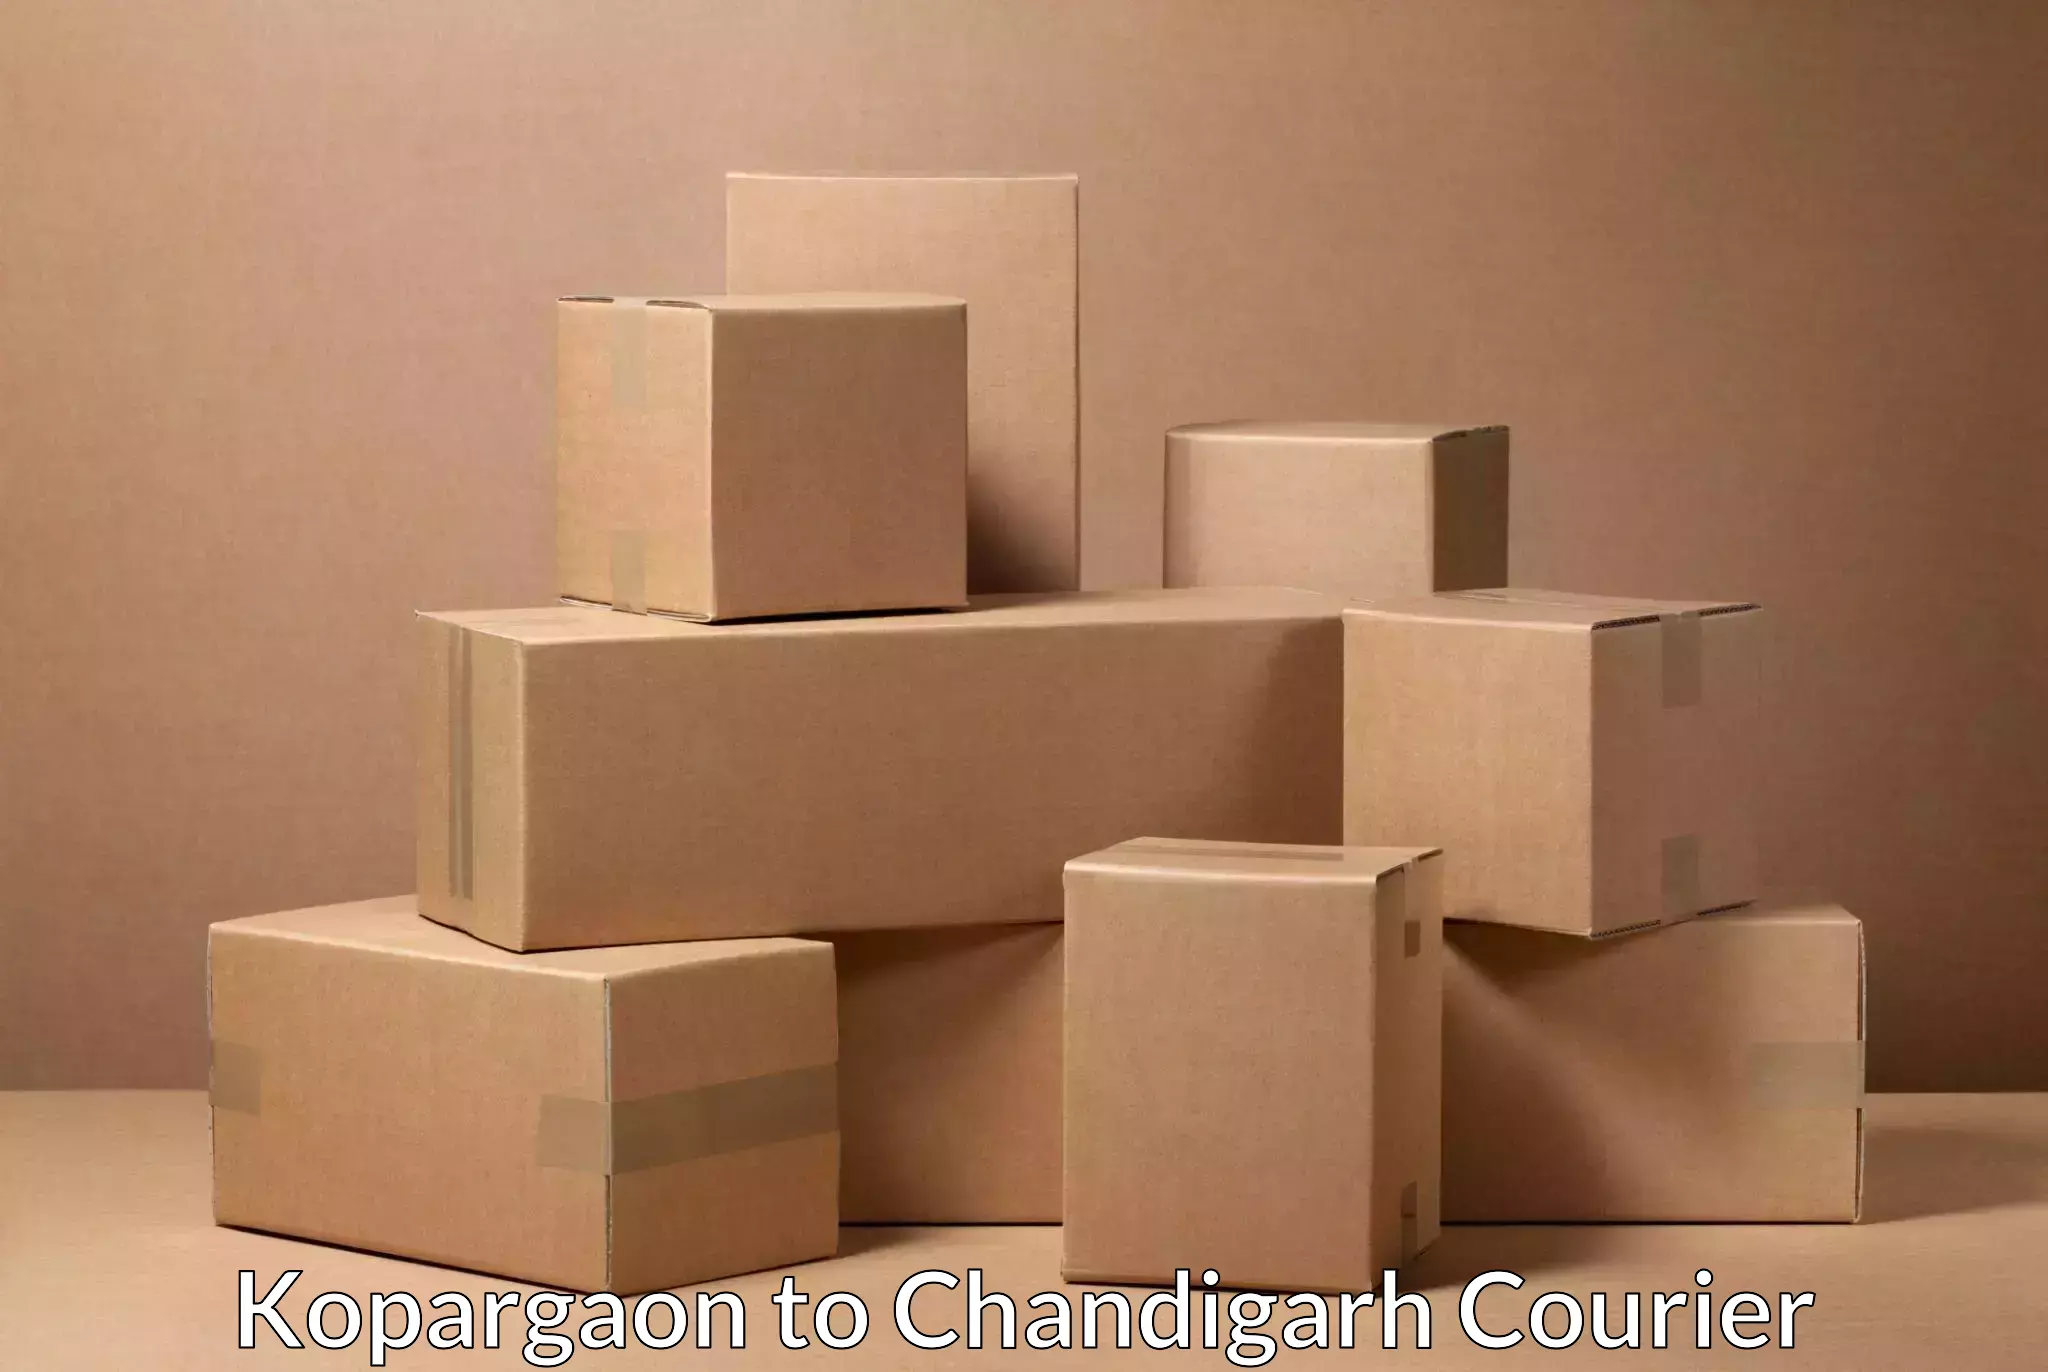 Rural area delivery Kopargaon to Chandigarh